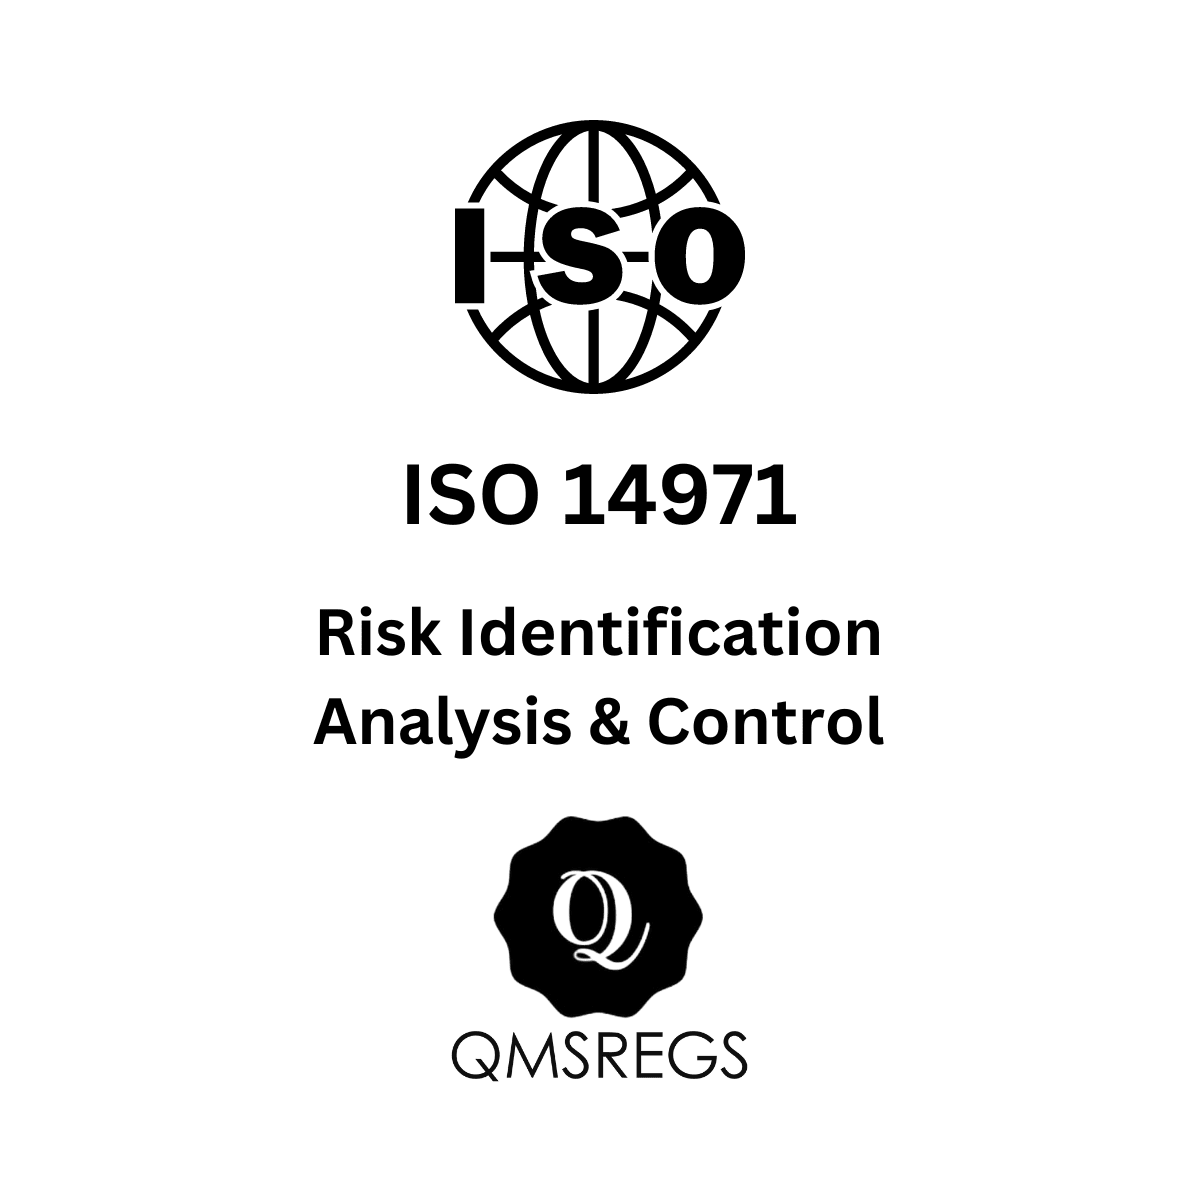 ISO 14971 Risk Identification Analysis and Control Template